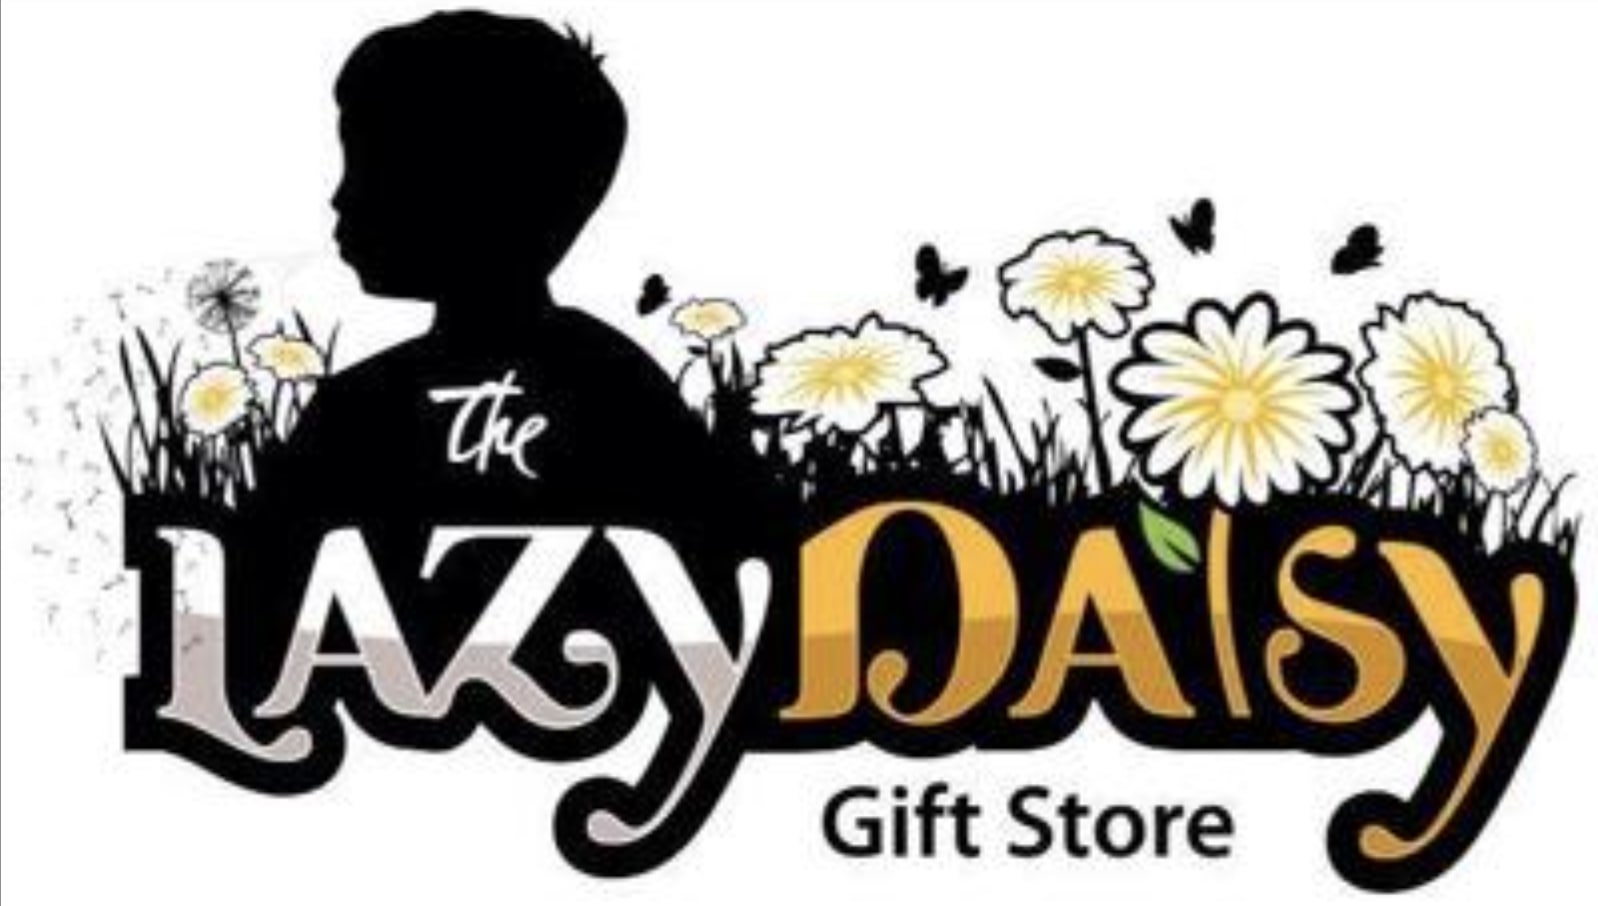 The Burn The Lazy Daisy gift store coming to Village at